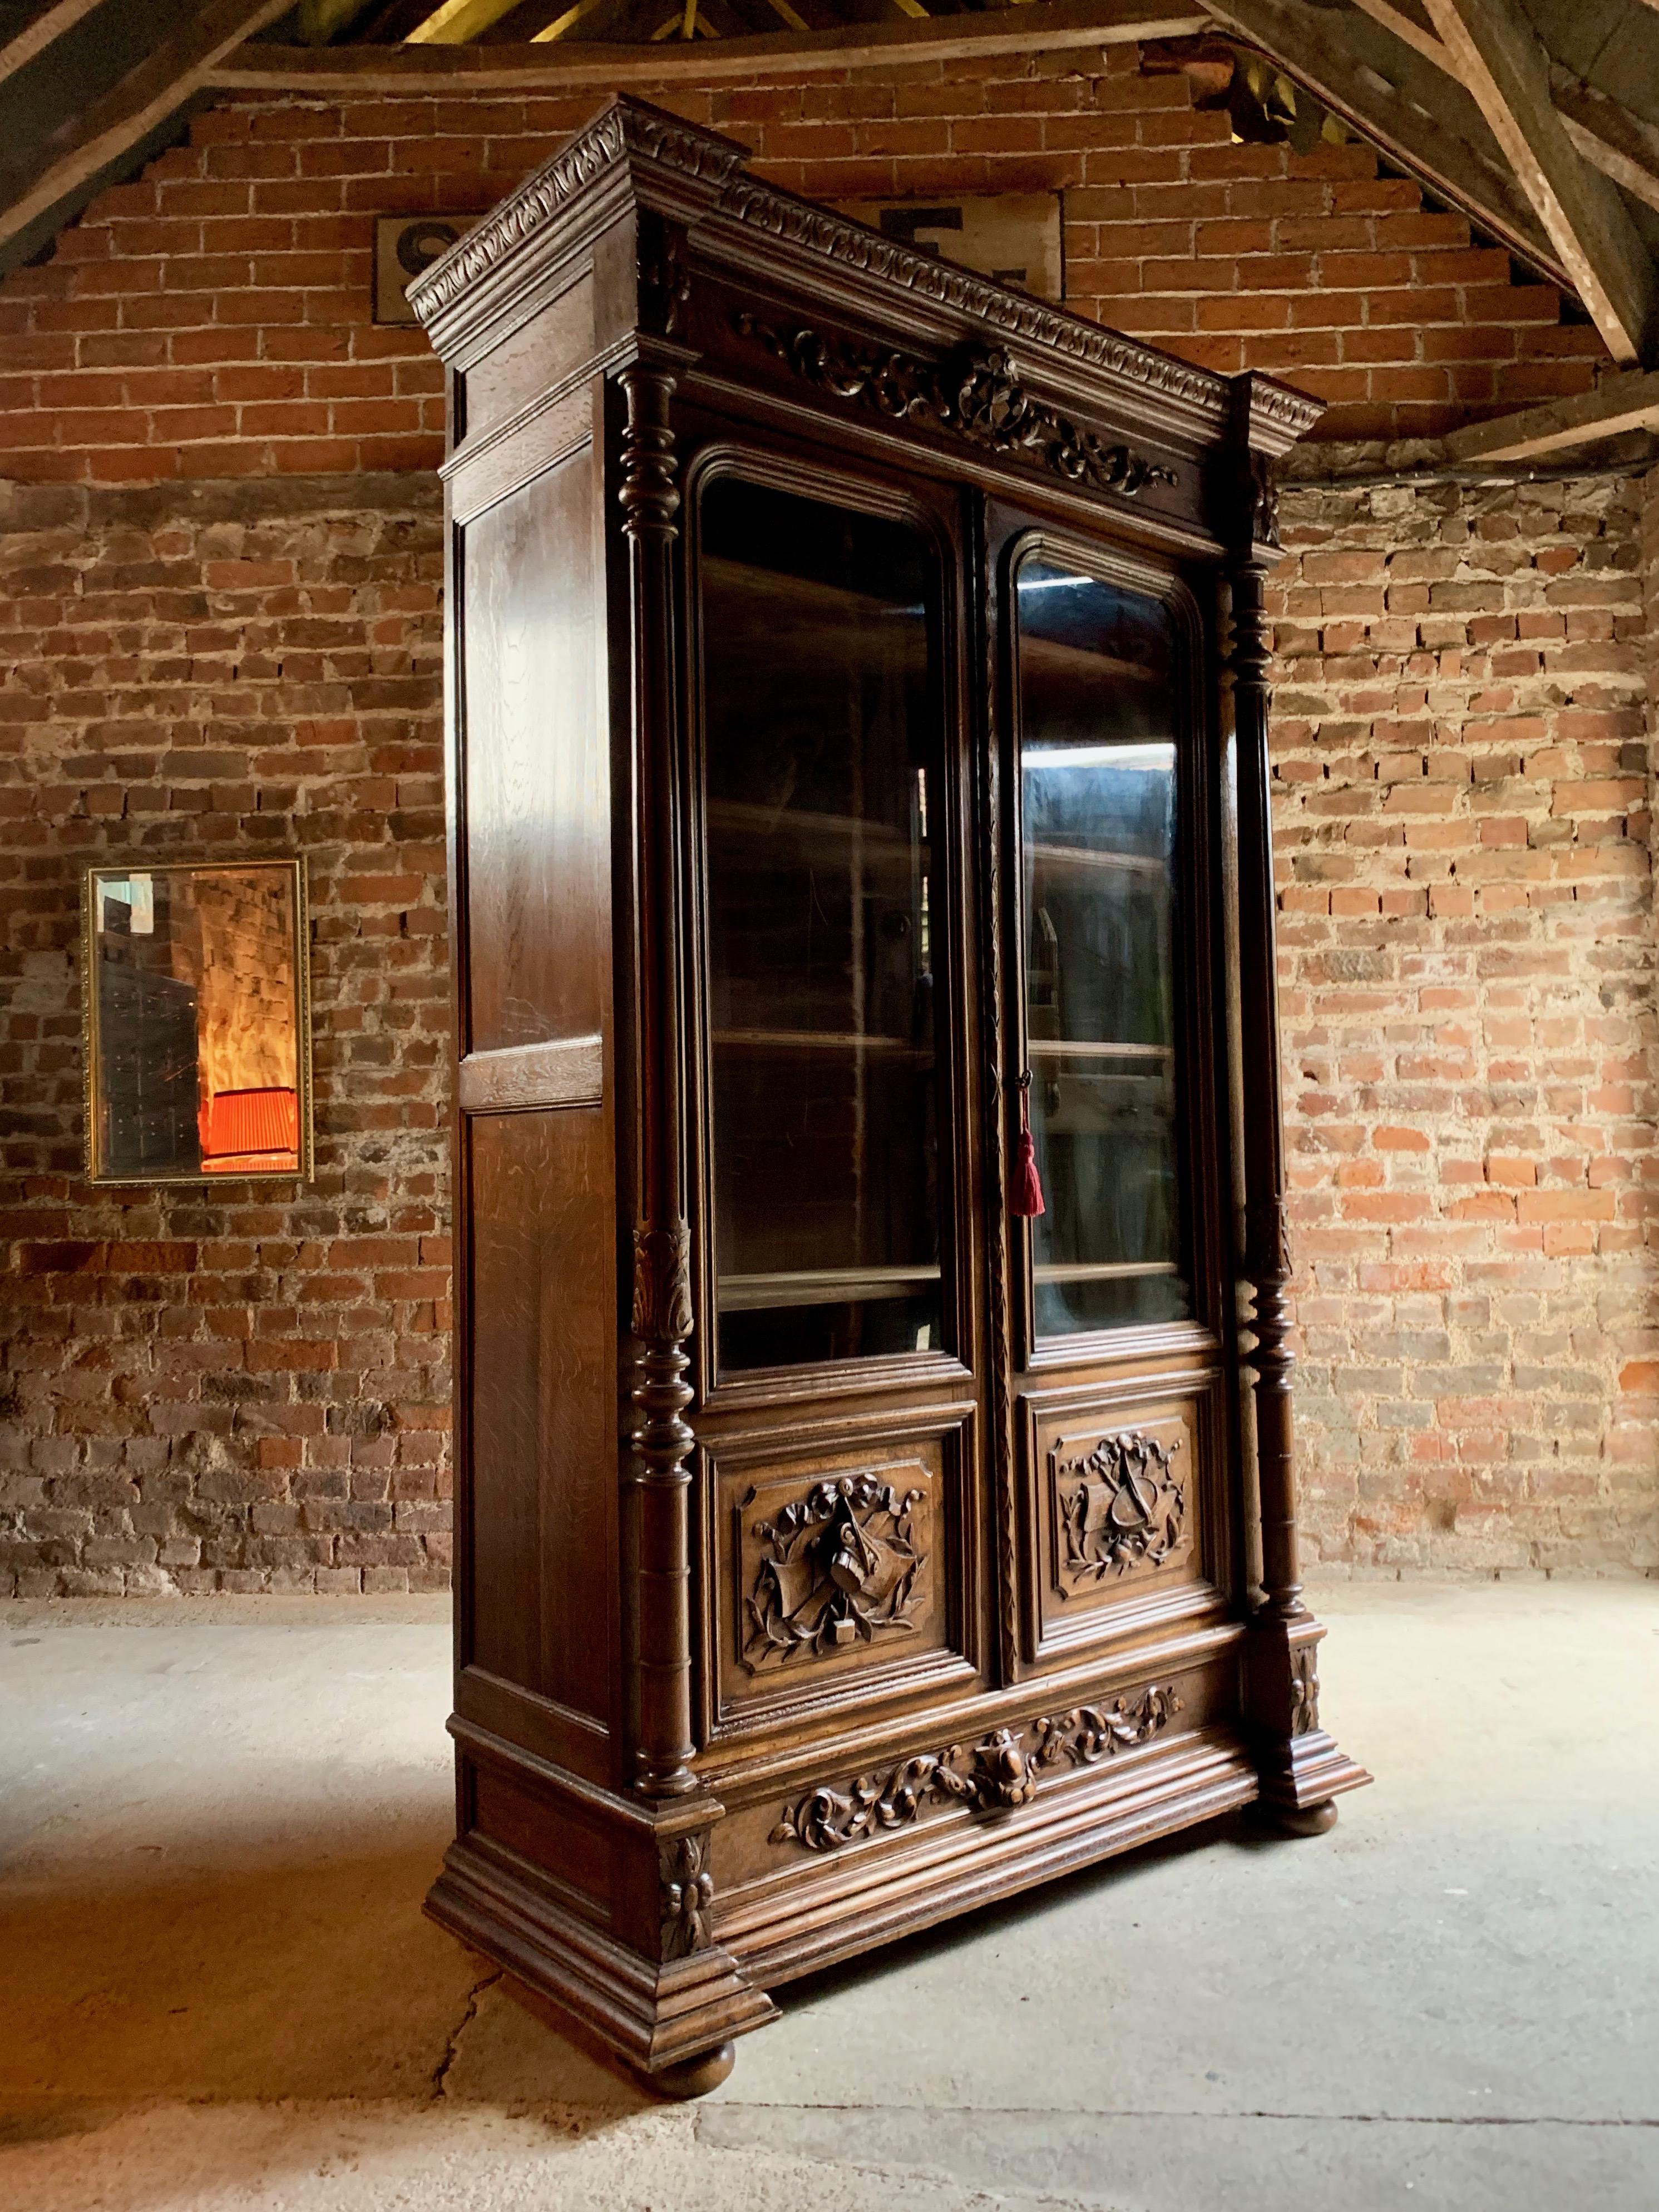 Antique 19th century French Solid Oak Bookcase Vitrine Circa 1890

A large 19th century French profusely carved solid oak two door bookcase vitrine circa 1890, the ornate overhanging moulded carved cornice above two heavily carved panelled glazed